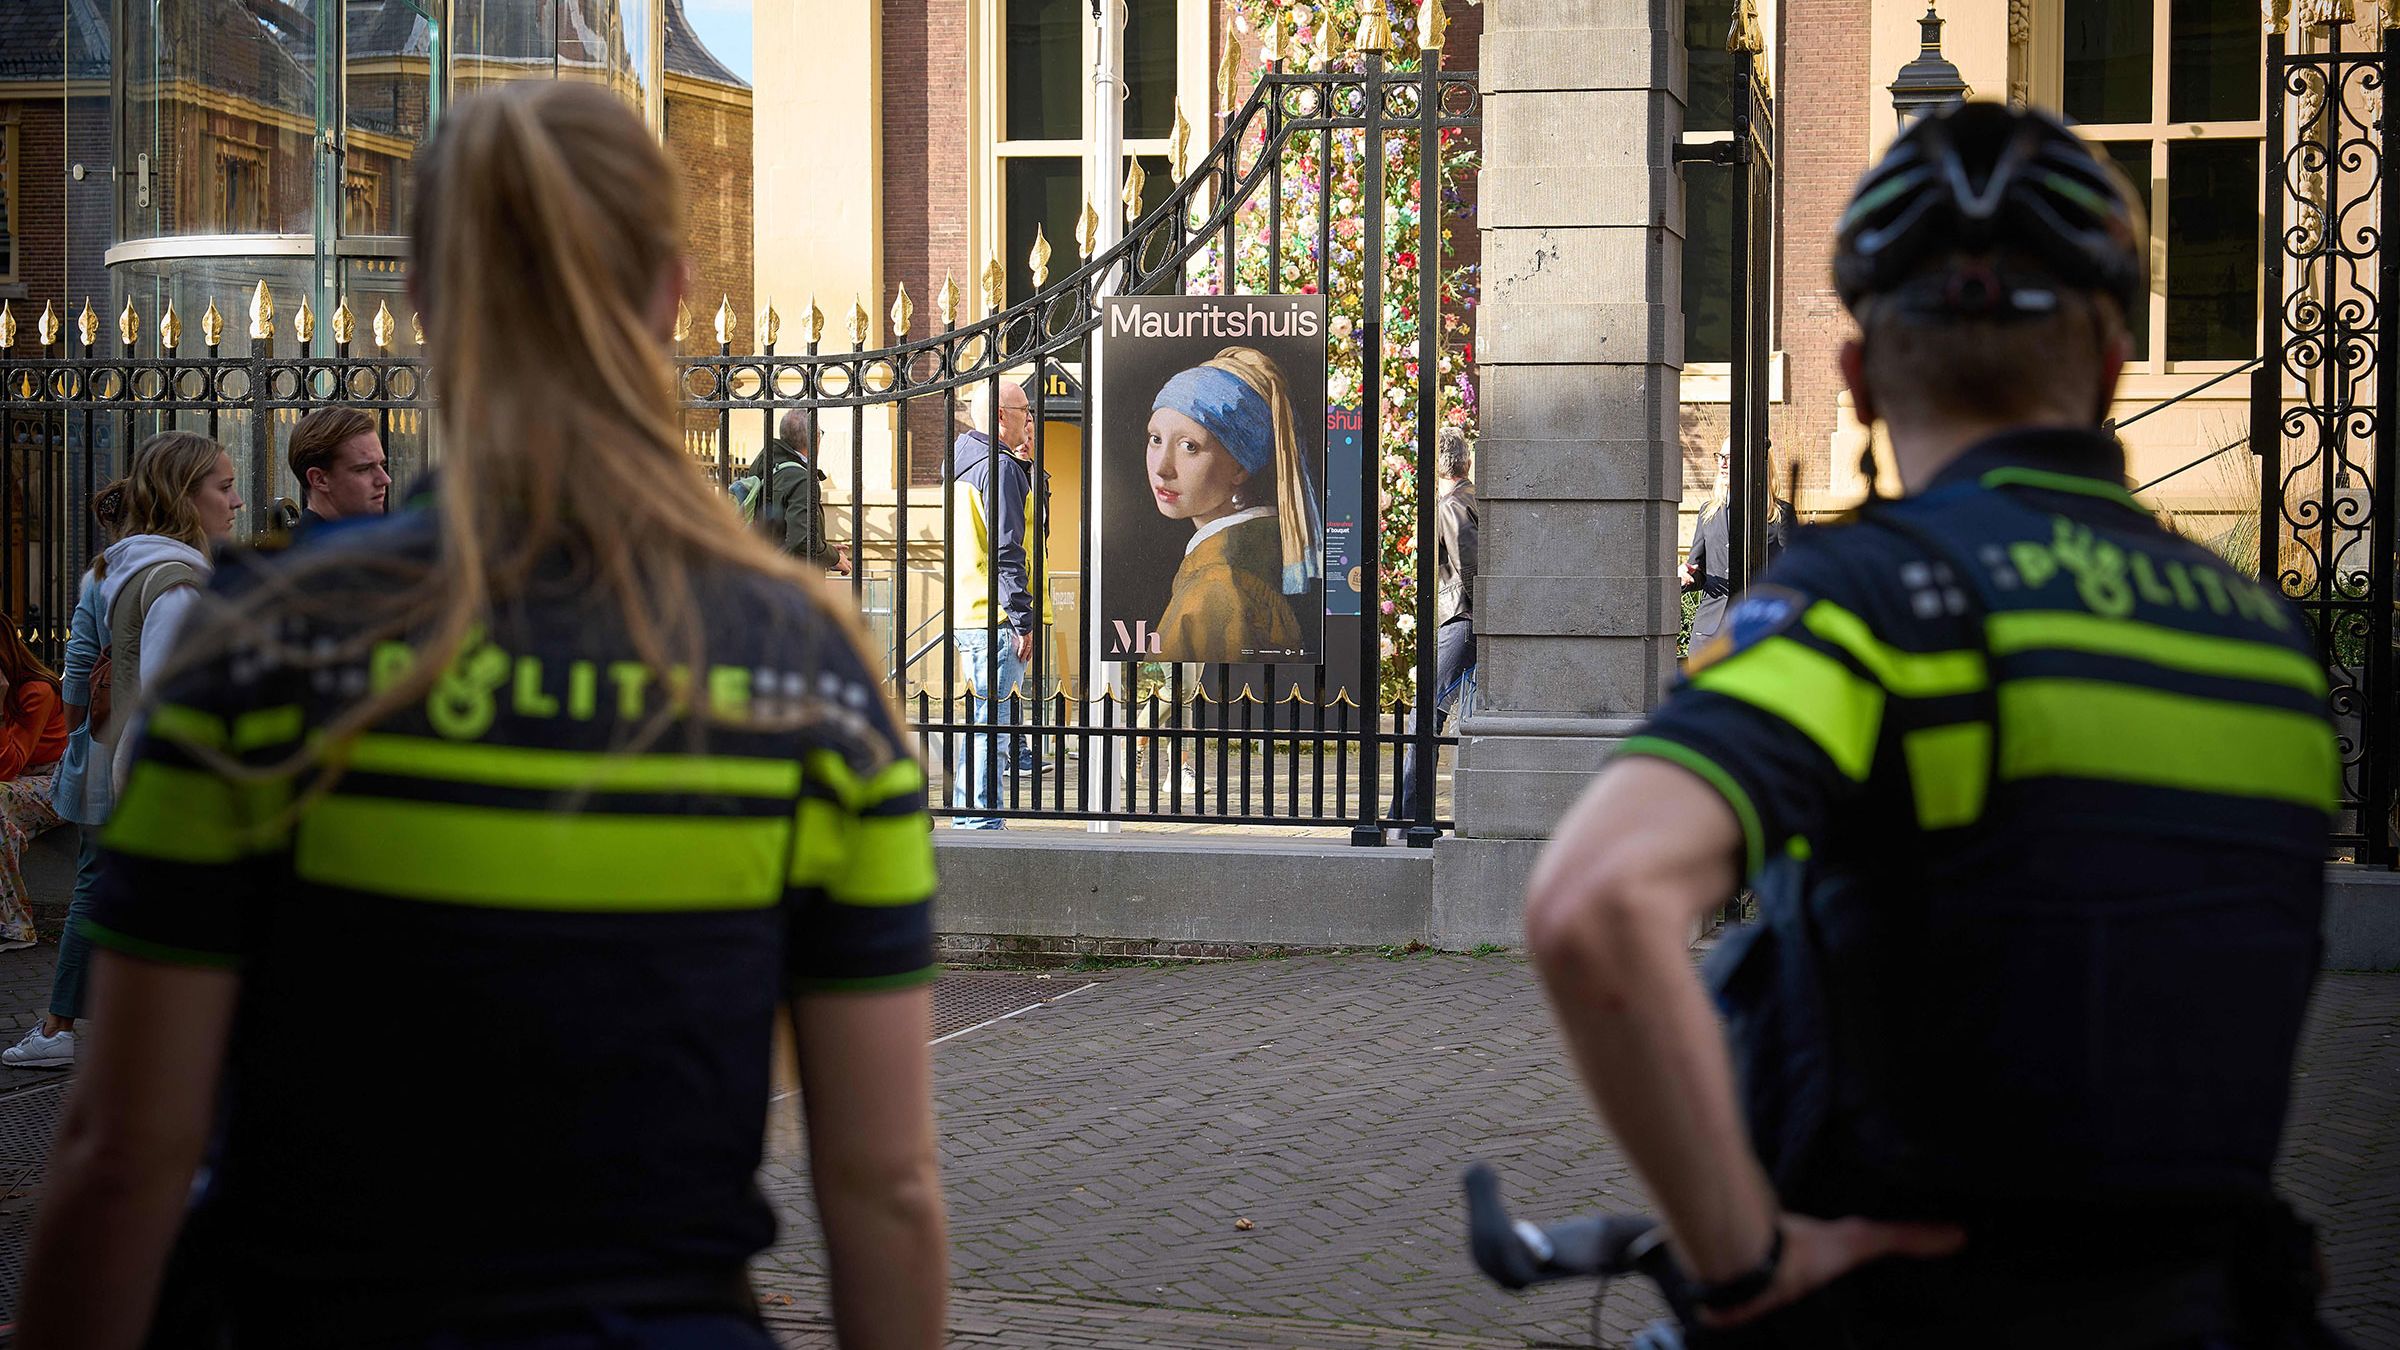 Police stand guard outside the Mauritshuis museum in The Hague in October 2022, after Johannes Vermeer's "Girl with a Pearl Earring" was targeted by climate activists.